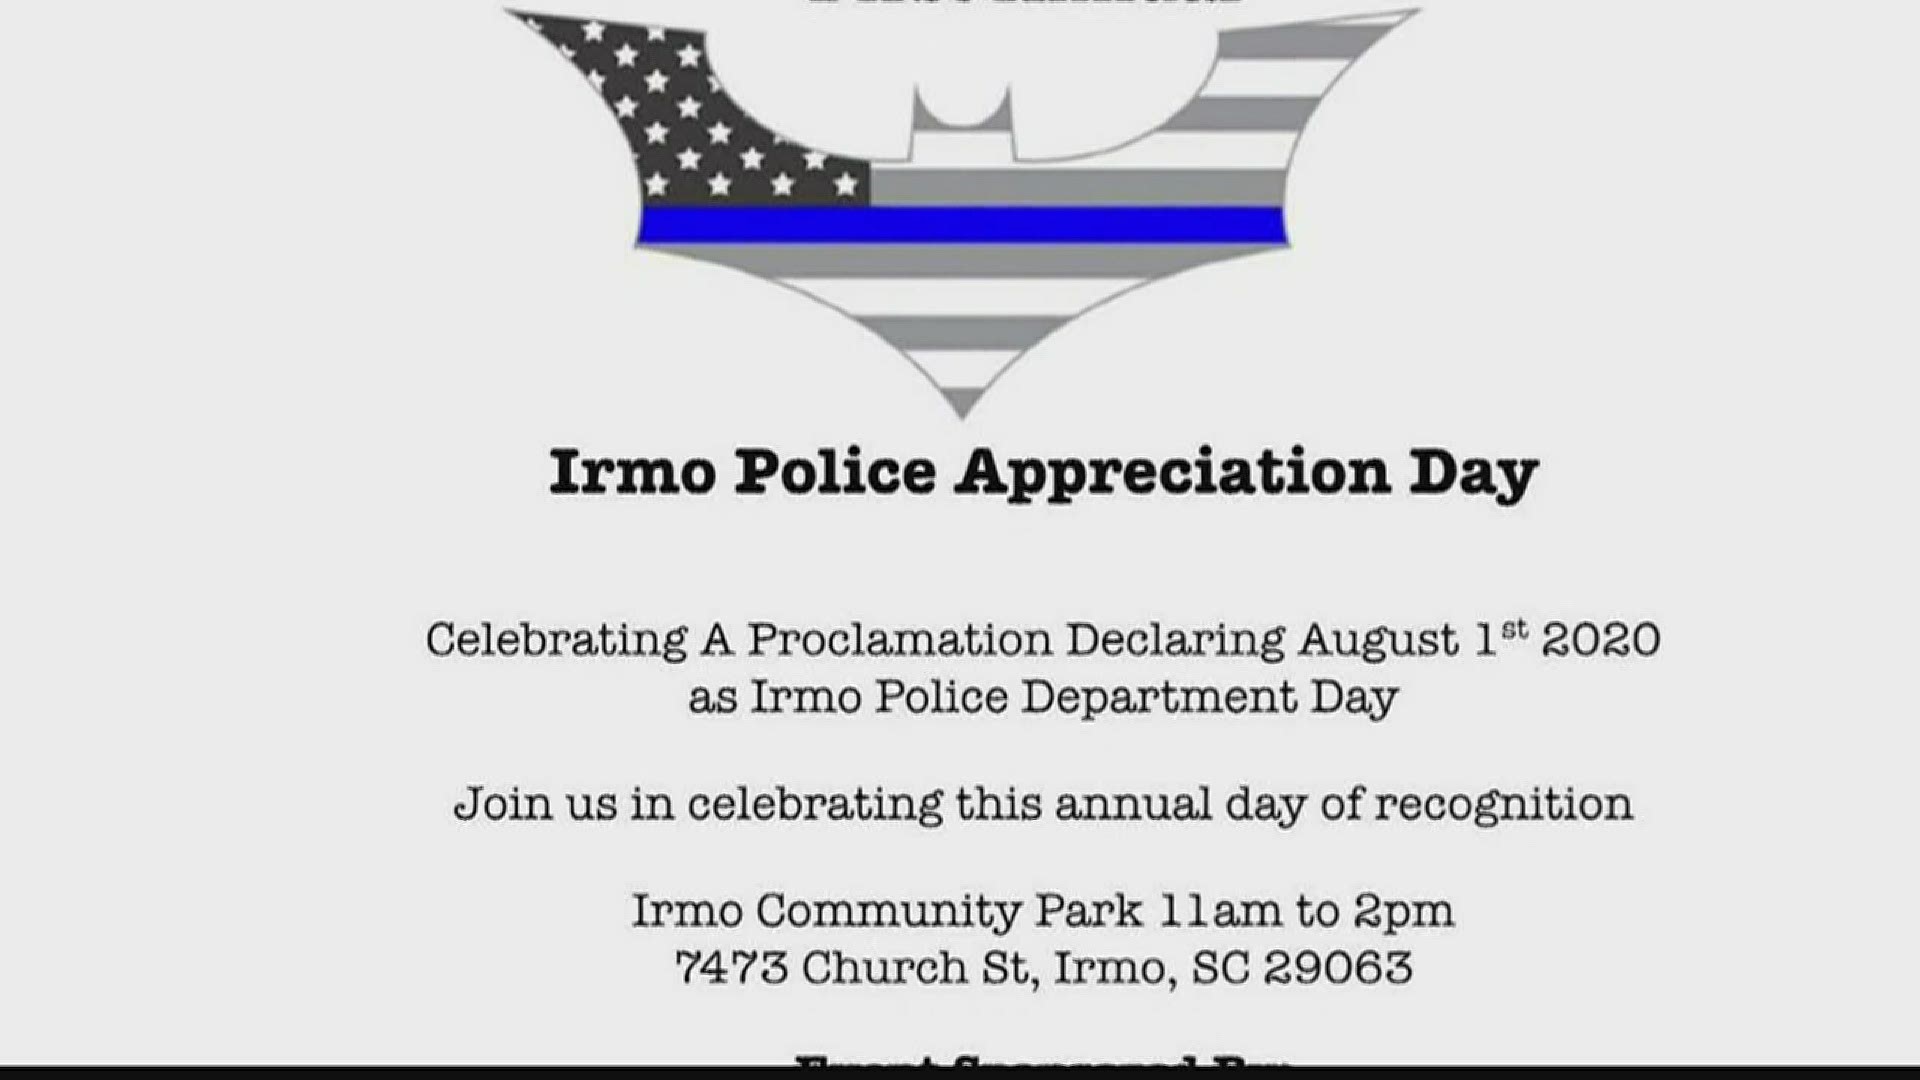 Nicholas Cole is behind making August 1st Irmo Police Appreciation in the town.